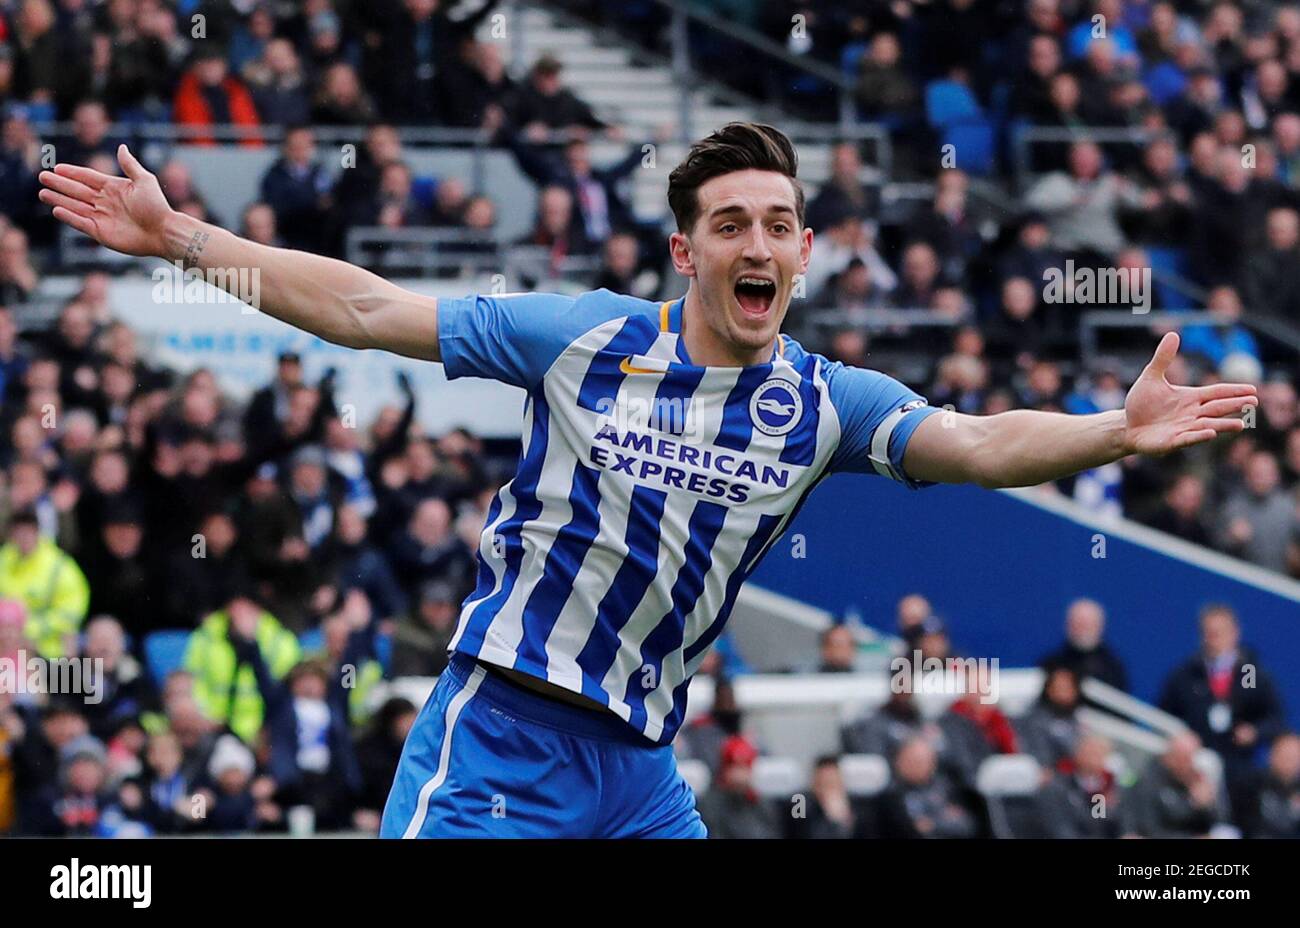 Soccer Football - Premier League - Brighton & Hove Albion vs Arsenal - The American Express Community Stadium, Brighton, Britain - March 4, 2018   Brighton's Lewis Dunk celebrates scoring their first goal    REUTERS/Eddie Keogh    EDITORIAL USE ONLY. No use with unauthorized audio, video, data, fixture lists, club/league logos or 'live' services. Online in-match use limited to 75 images, no video emulation. No use in betting, games or single club/league/player publications.  Please contact your account representative for further details. Stock Photo